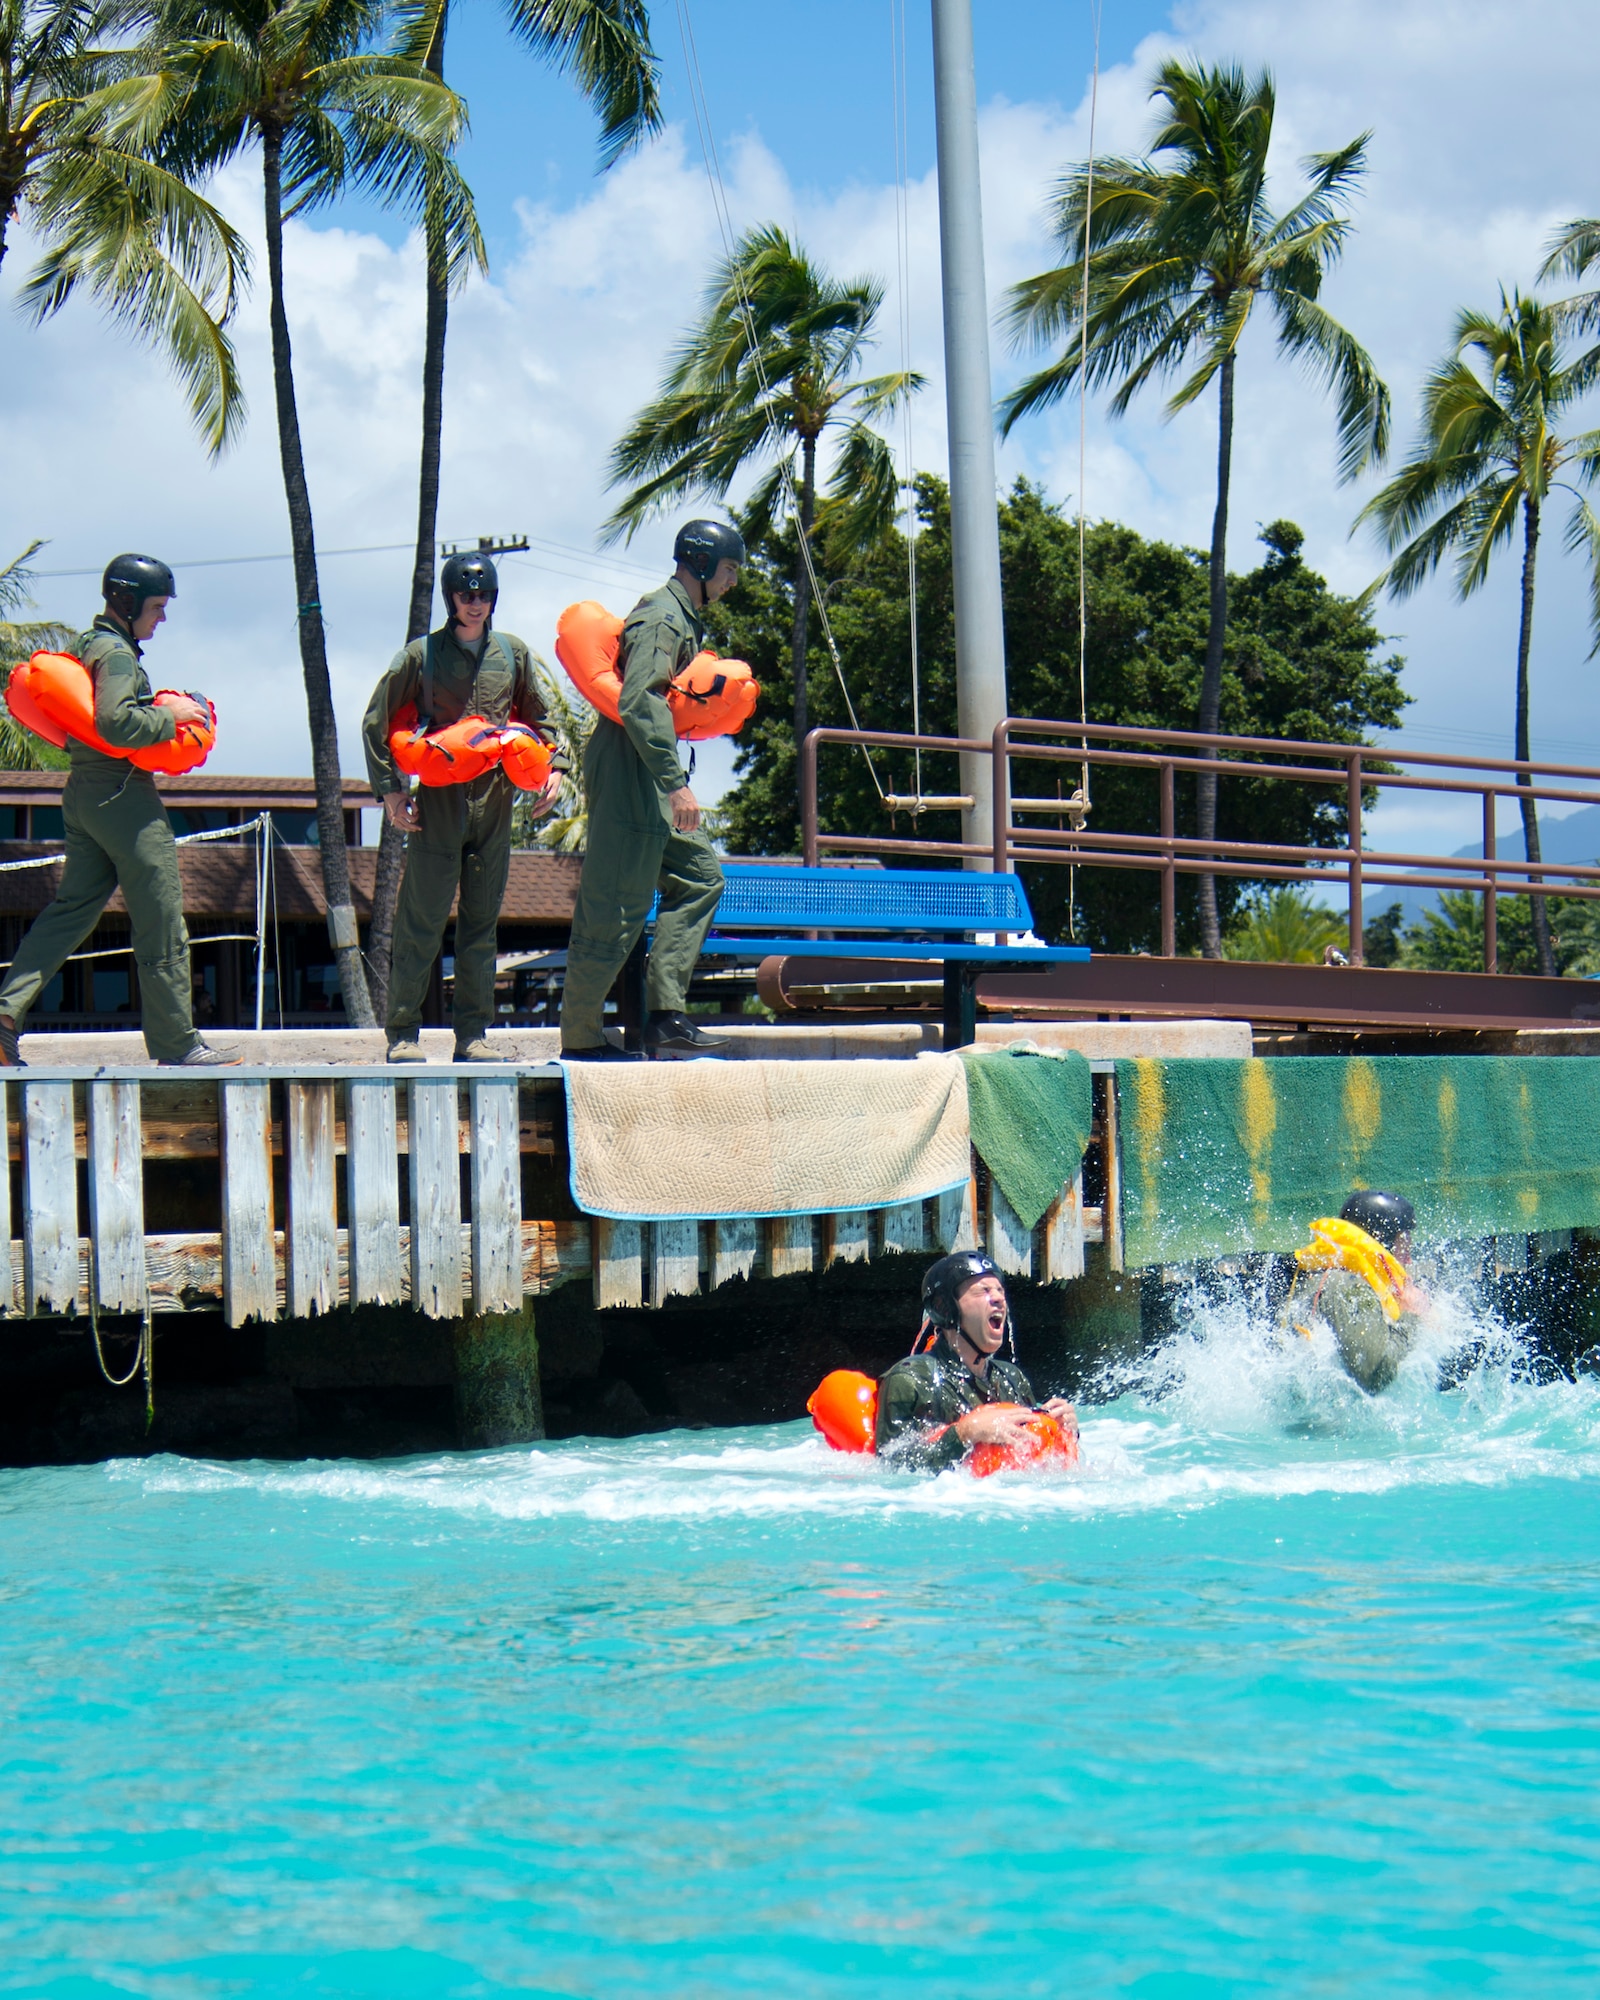 Airmen from the 535th Airlift Squadron, 65th Airlift Squadron and the 96th Air Refueling Squadron jump into Hickam Harbor to simulate exiting an aircraft that has landed in the ocean during water survival training on Joint Base Pearl Harbor-Hickam, Hawaii, March 23, 2015. Water survival training is completed on triennial basis for all aircrew assigned to the 15th Wing. (U.S. Air Force photo by Tech. Sgt. Aaron Oelrich/Released) 